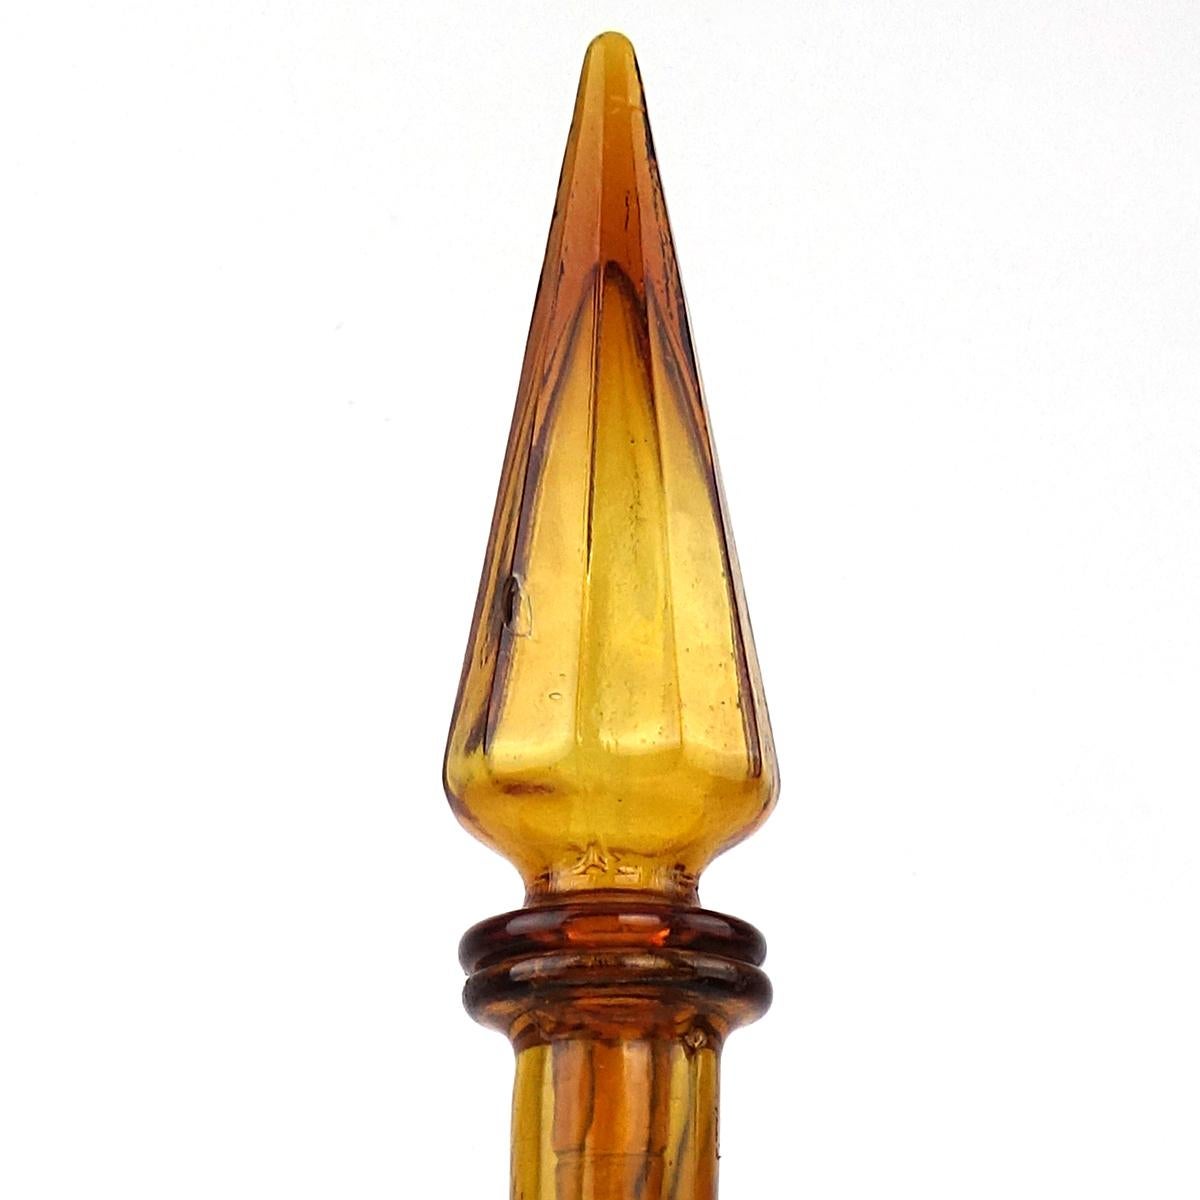 Sleek midcentury ochre glass decanter with stopper.
The design by Empoli is called Genie.